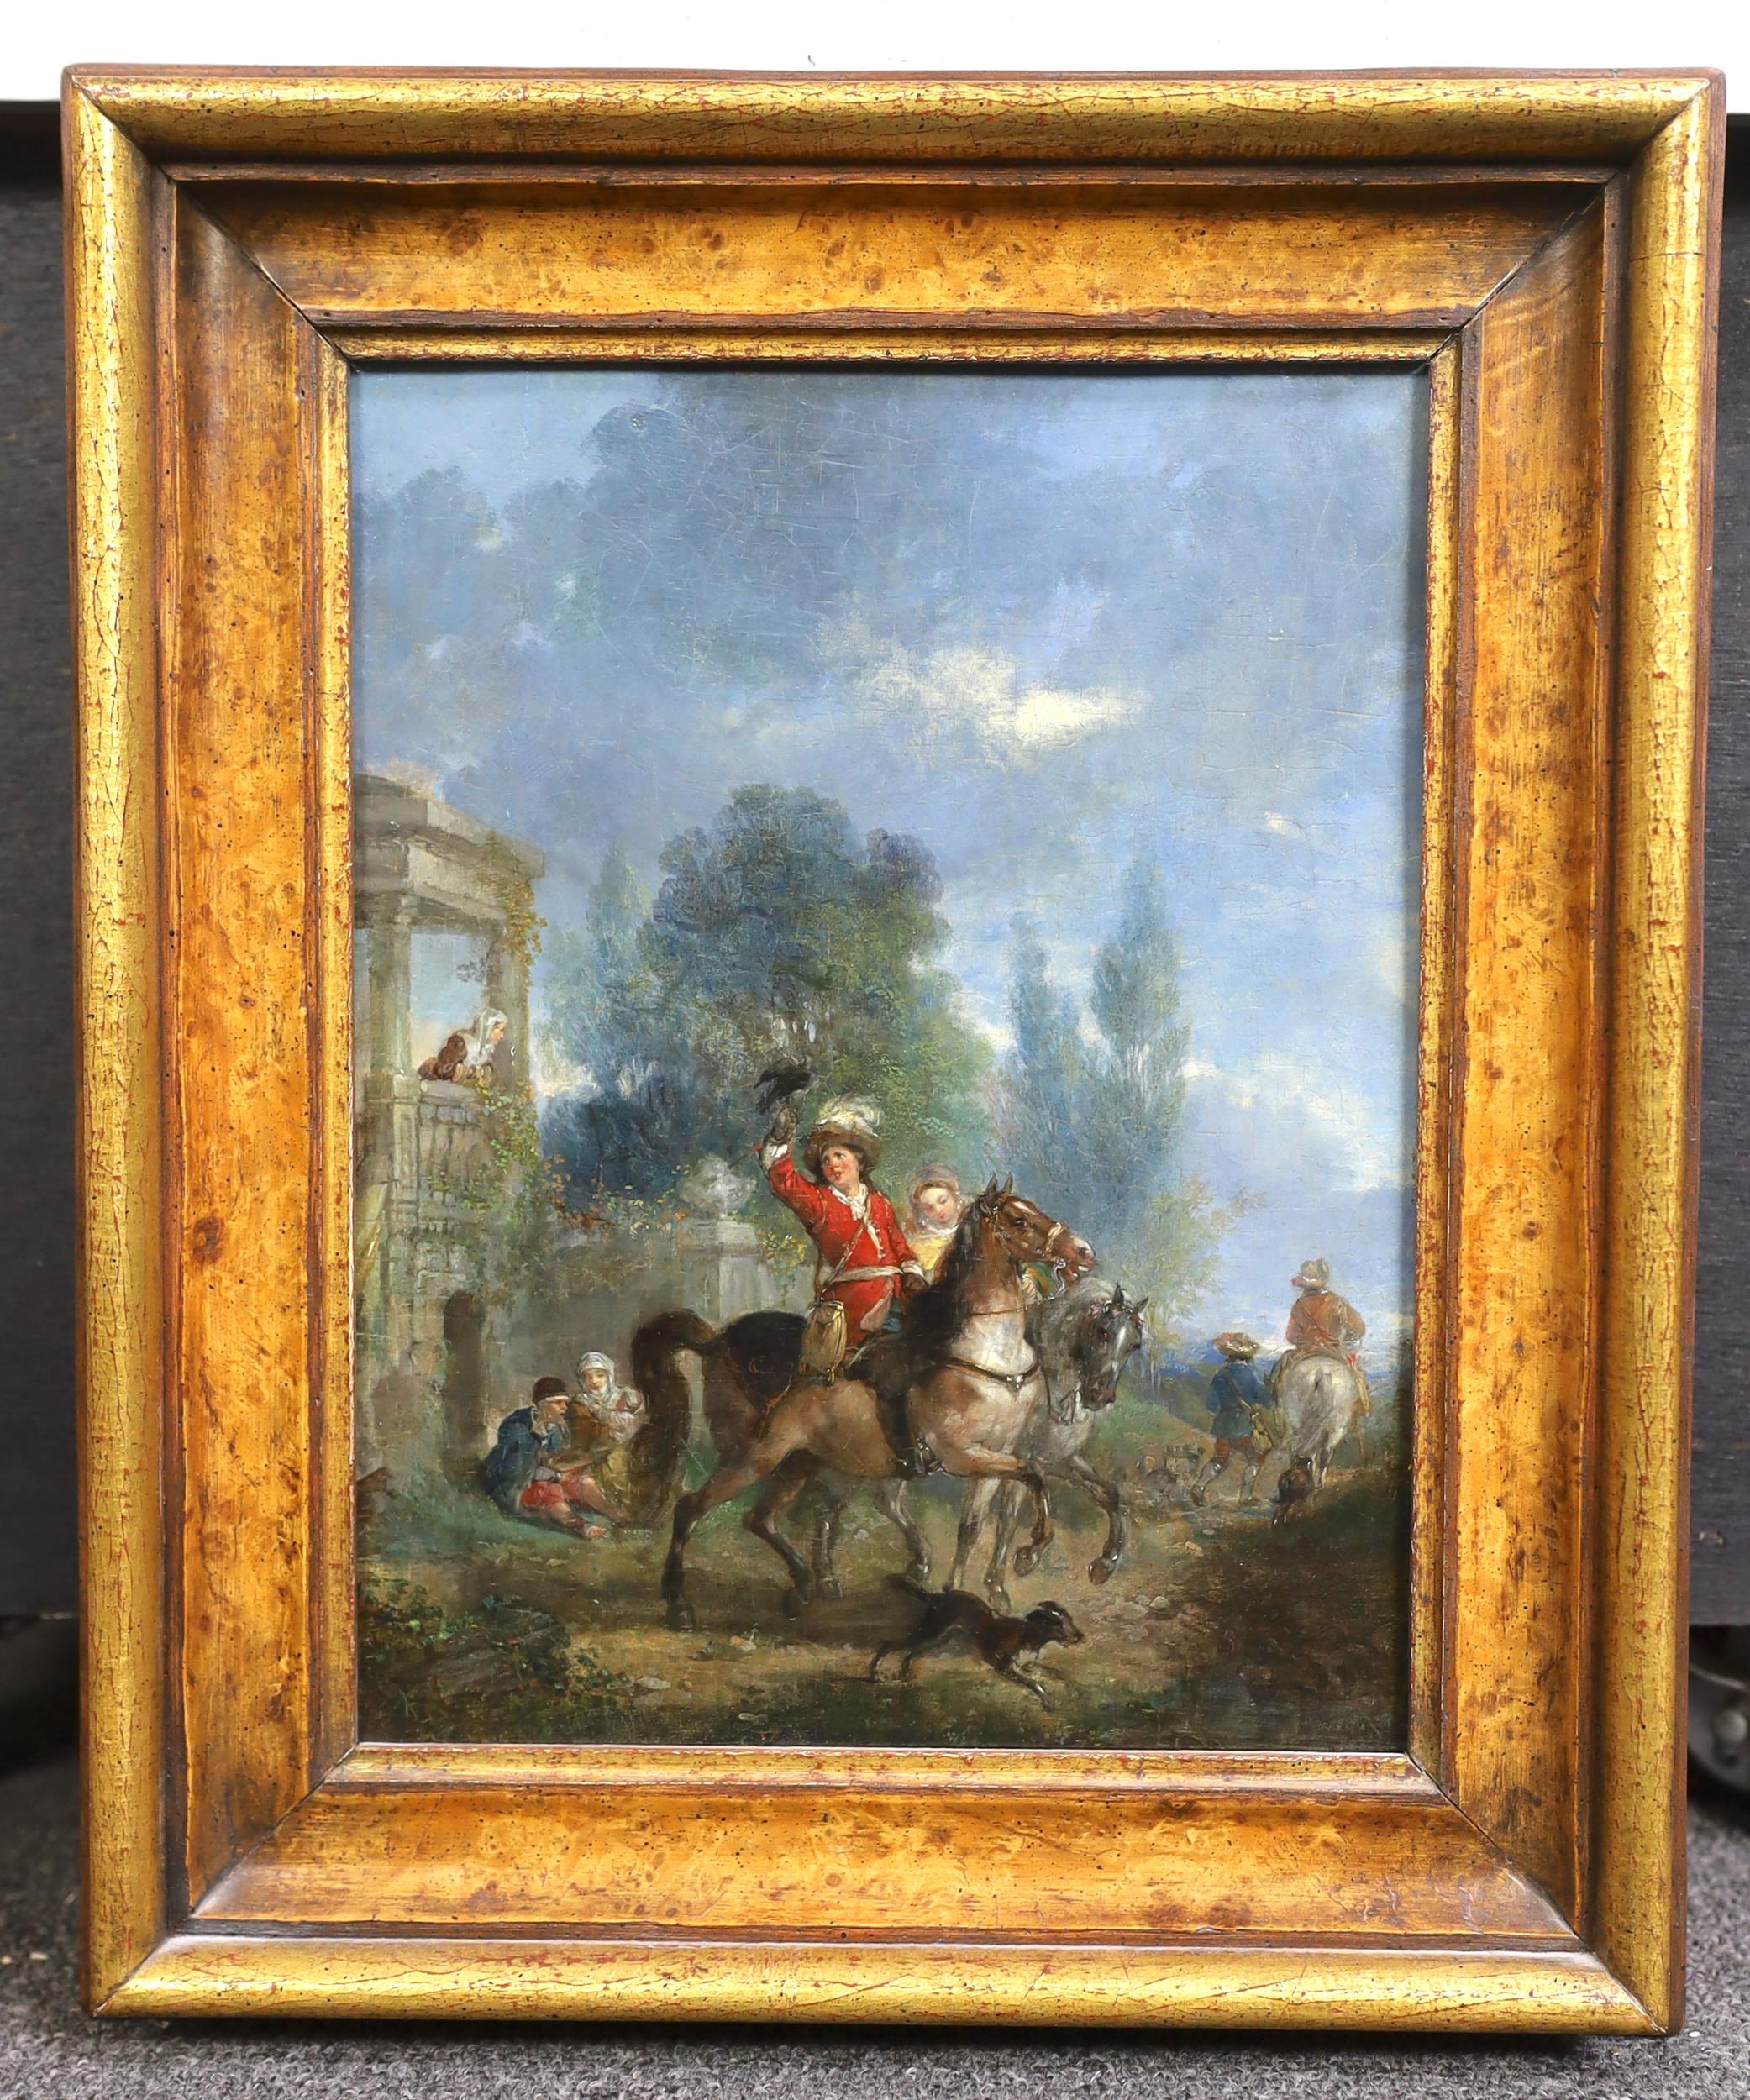 Manner of Philip Wouwerman (Haarlem, 1619-1668) A hawking party setting outoil on wooden panel27 x - Image 2 of 3